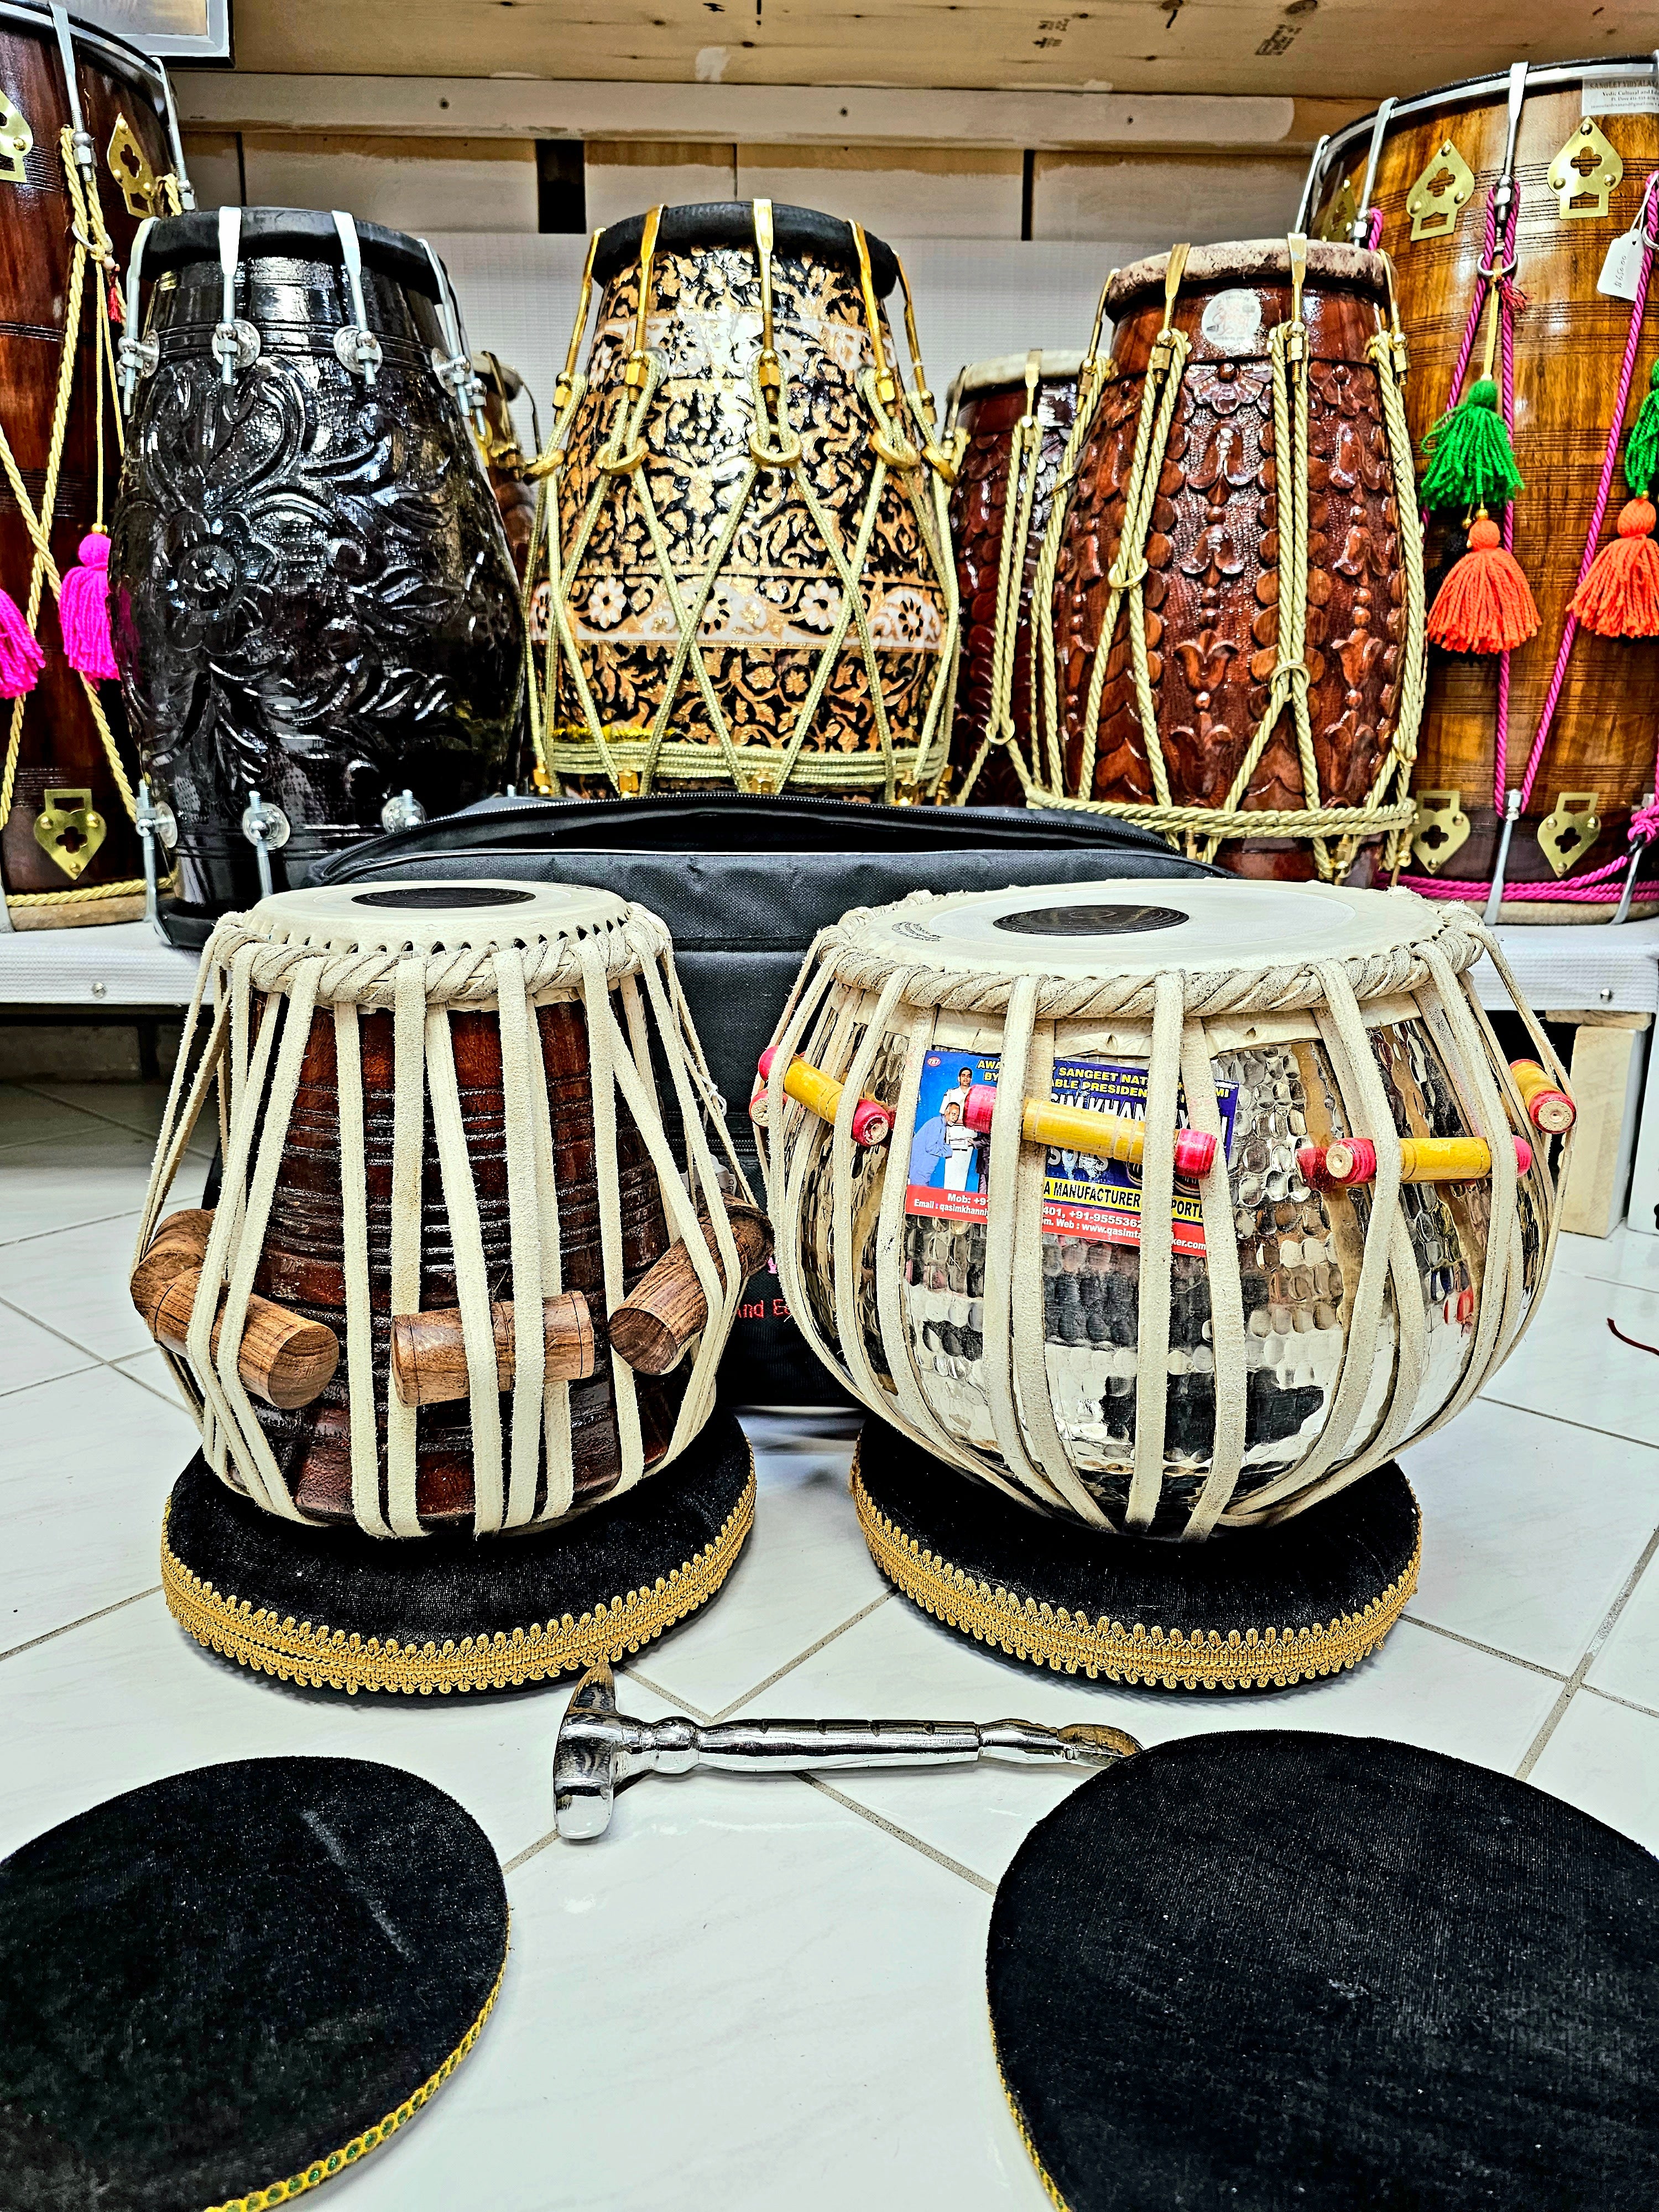 Harmonious Echoes: 5.75" C#/D Red Sheesham Dayan + 9" Hammer-Dented Design Silver Copper Bayan, Refurbished Tabla Set (Used - Slight Buzzing on Both Pieces)